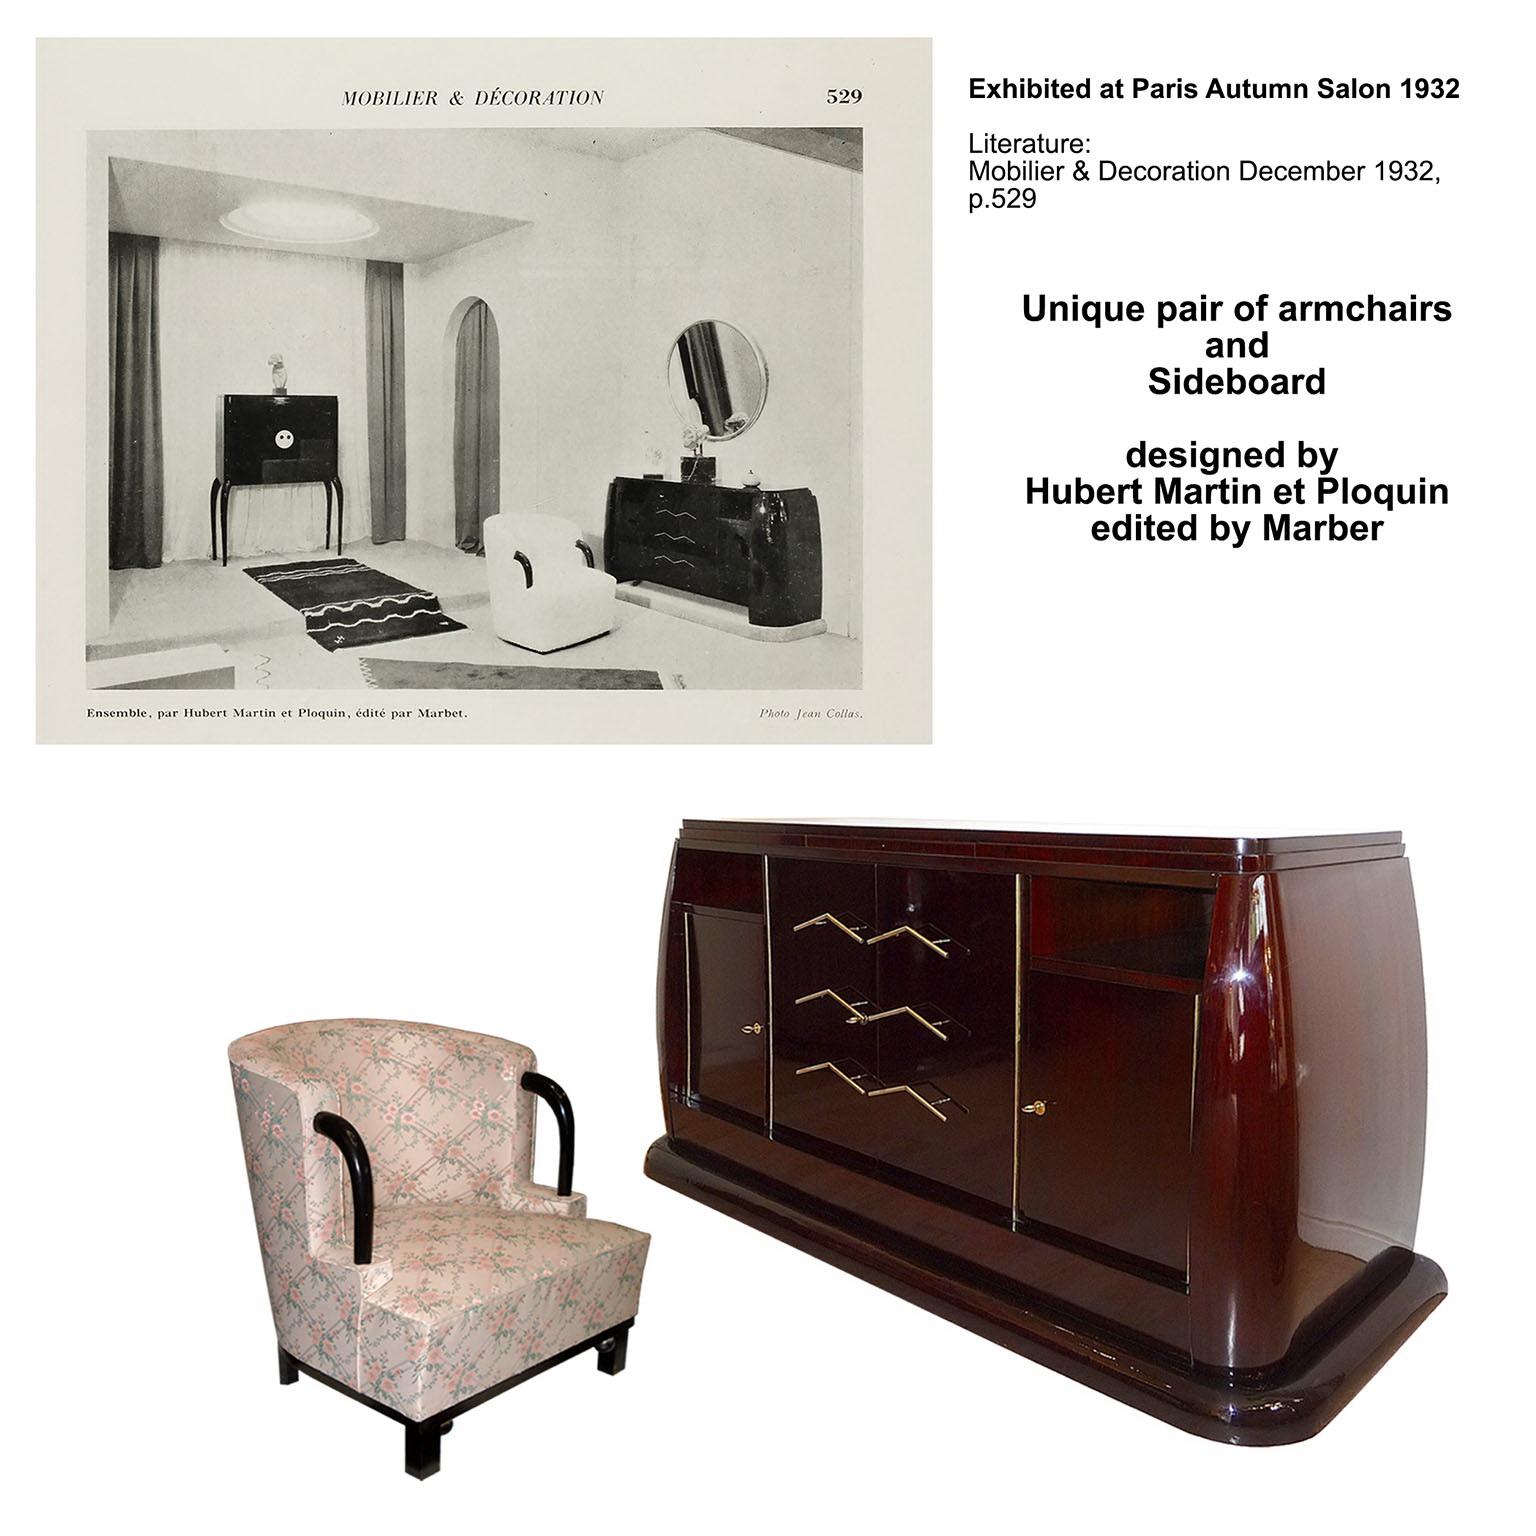 Exquisite French Art Deco armchairs designed by Hubert Martin et Ploquin, edited by Marber, France, circa 1930s.
Identical model exhibited at Paris Autumn salon 1932, mentioned in the period literature as being 